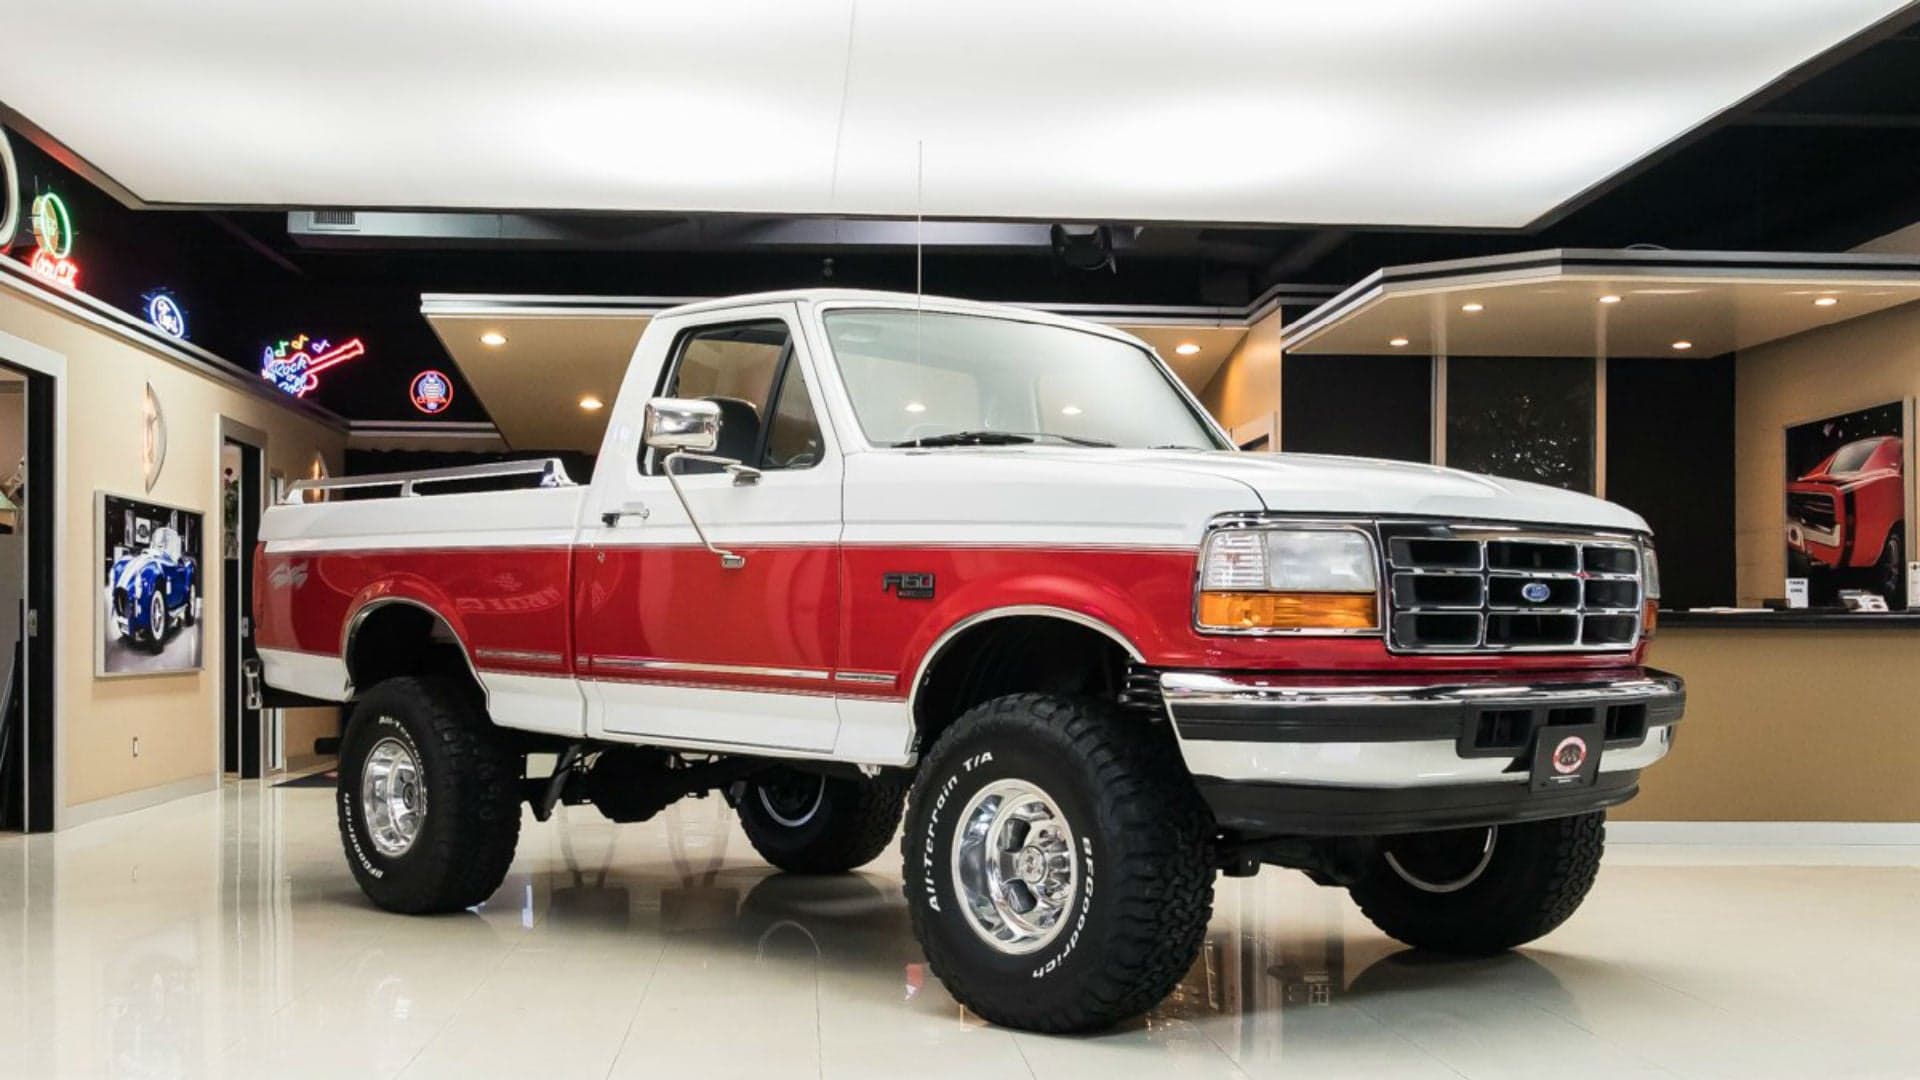 This Perfect Survivor 1996 Ford F-150 Costs the Same as a Brand-New Pickup Truck